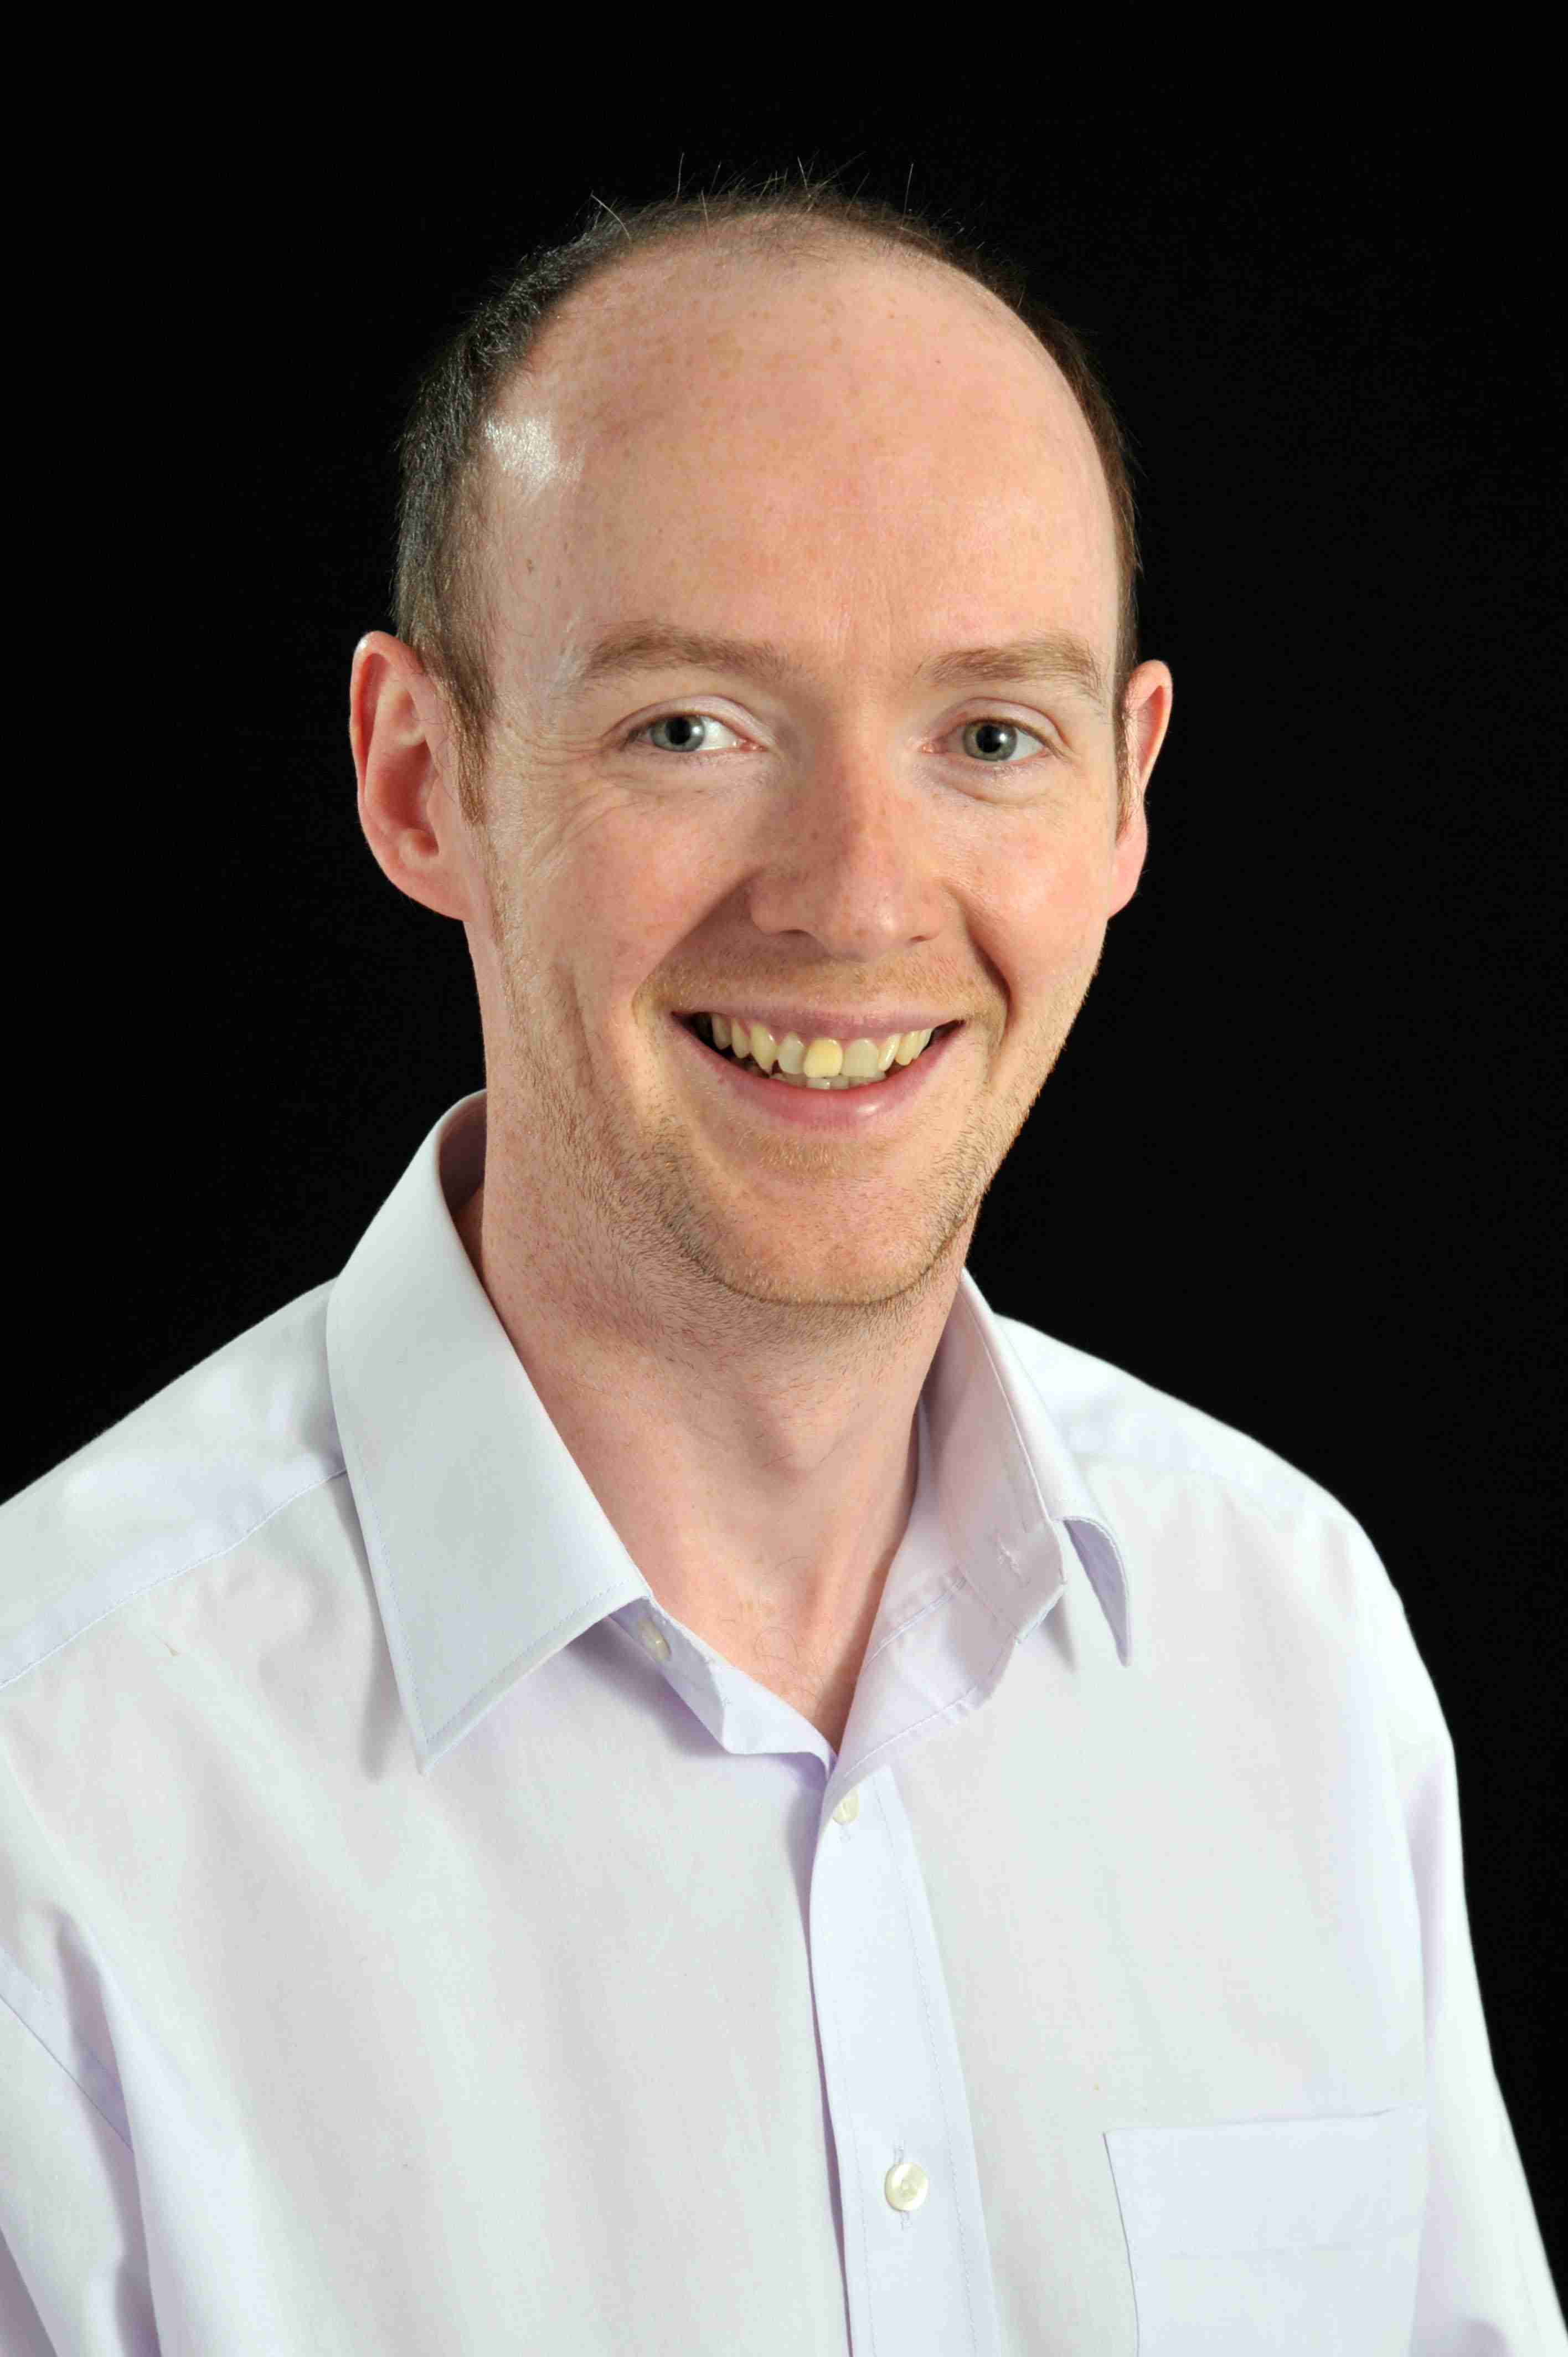 Profile image of Dr Mark Fogarty